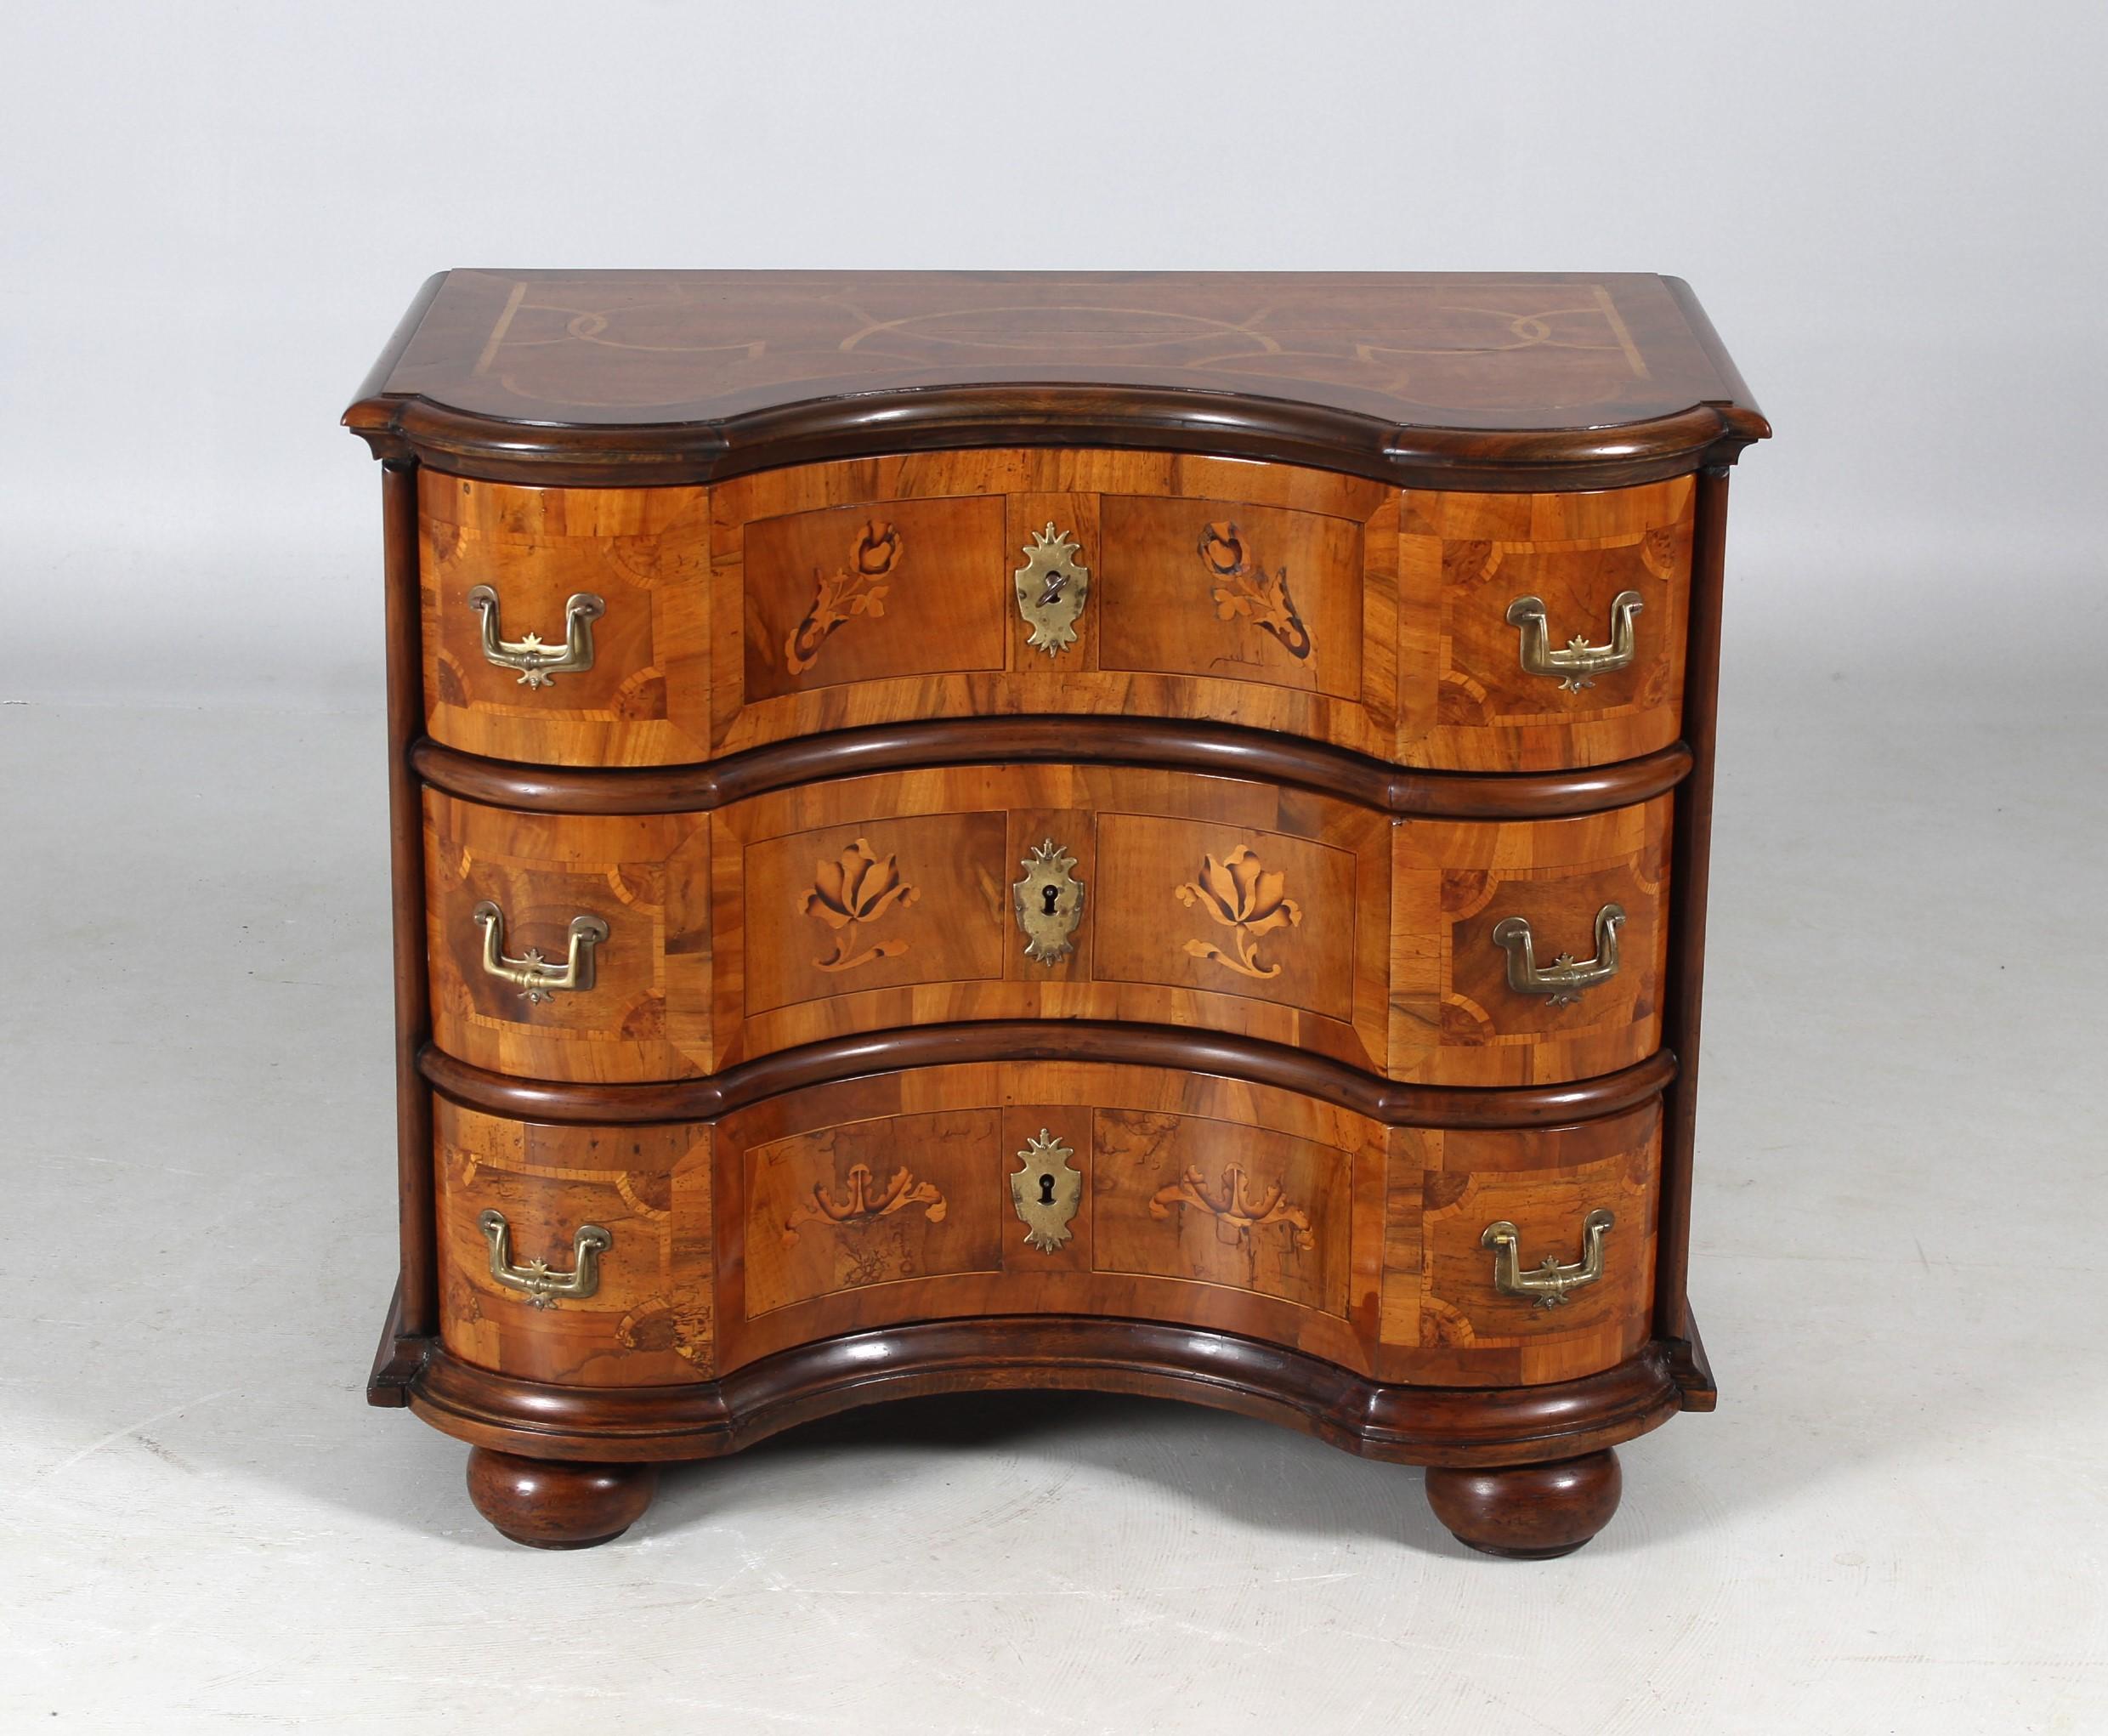 Small antique baroque chest of drawers

Palatinate
Walnut
Louis XV 18th century and later

Dimensions: H x W x D: 79 x 95 x 55 cm

Description:
A three-leaf piece of furniture of unusually small dimensions standing on round squeeze